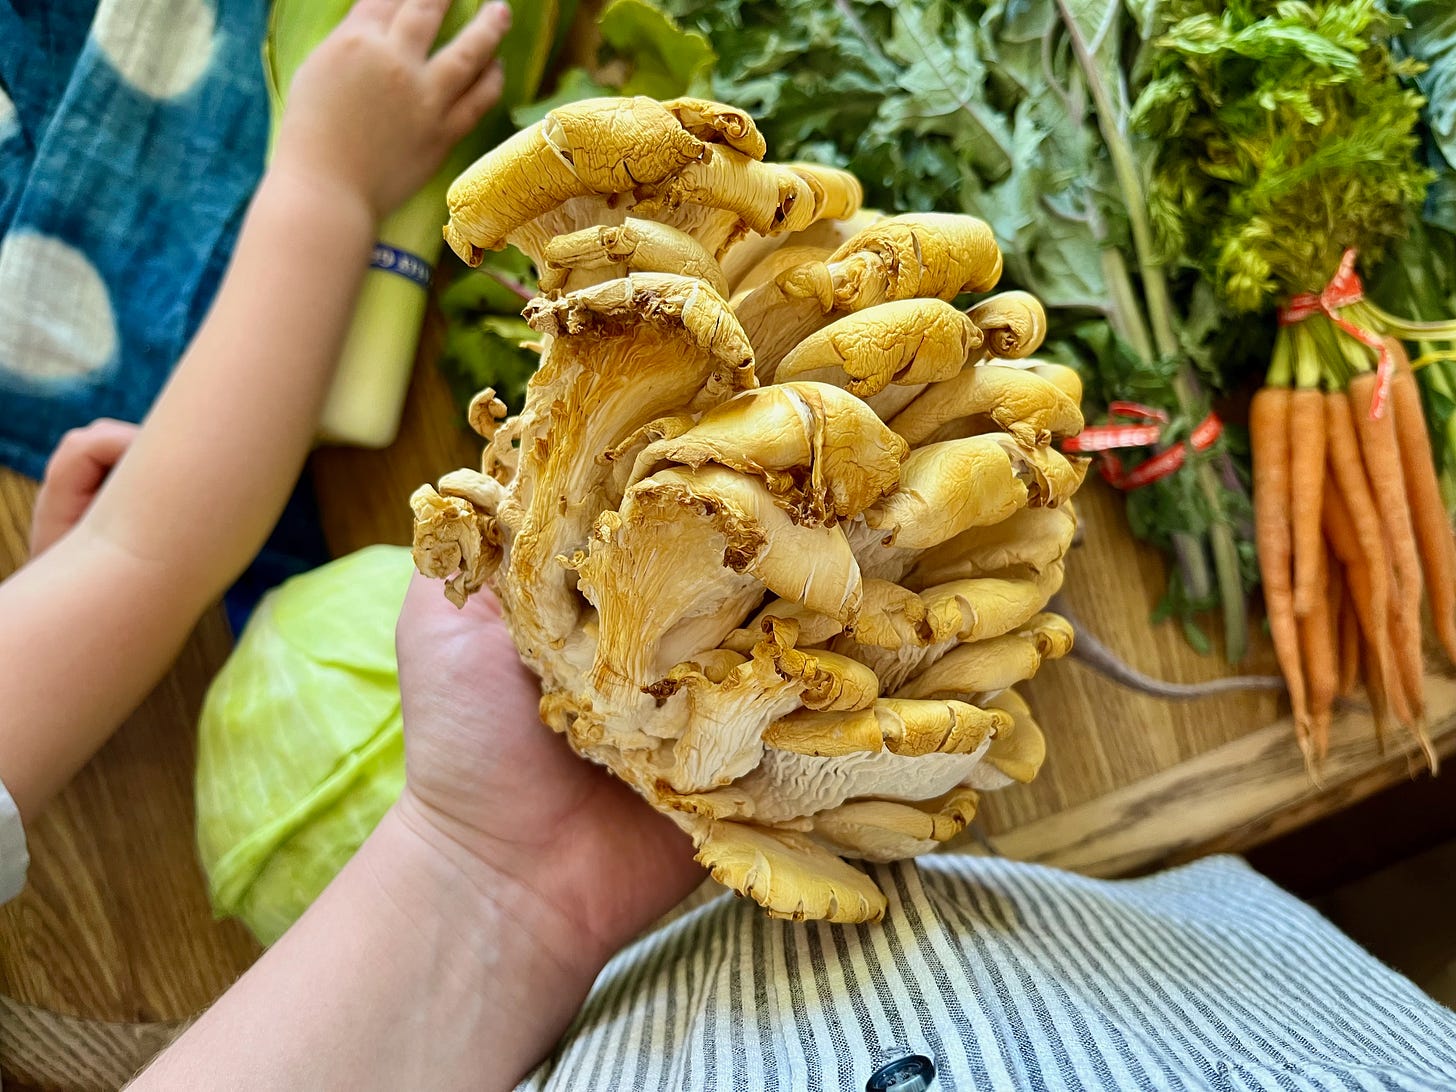 I'm holding a beautiful golden oyster mushroom, in the background my daughter grabs a bunch of leeks